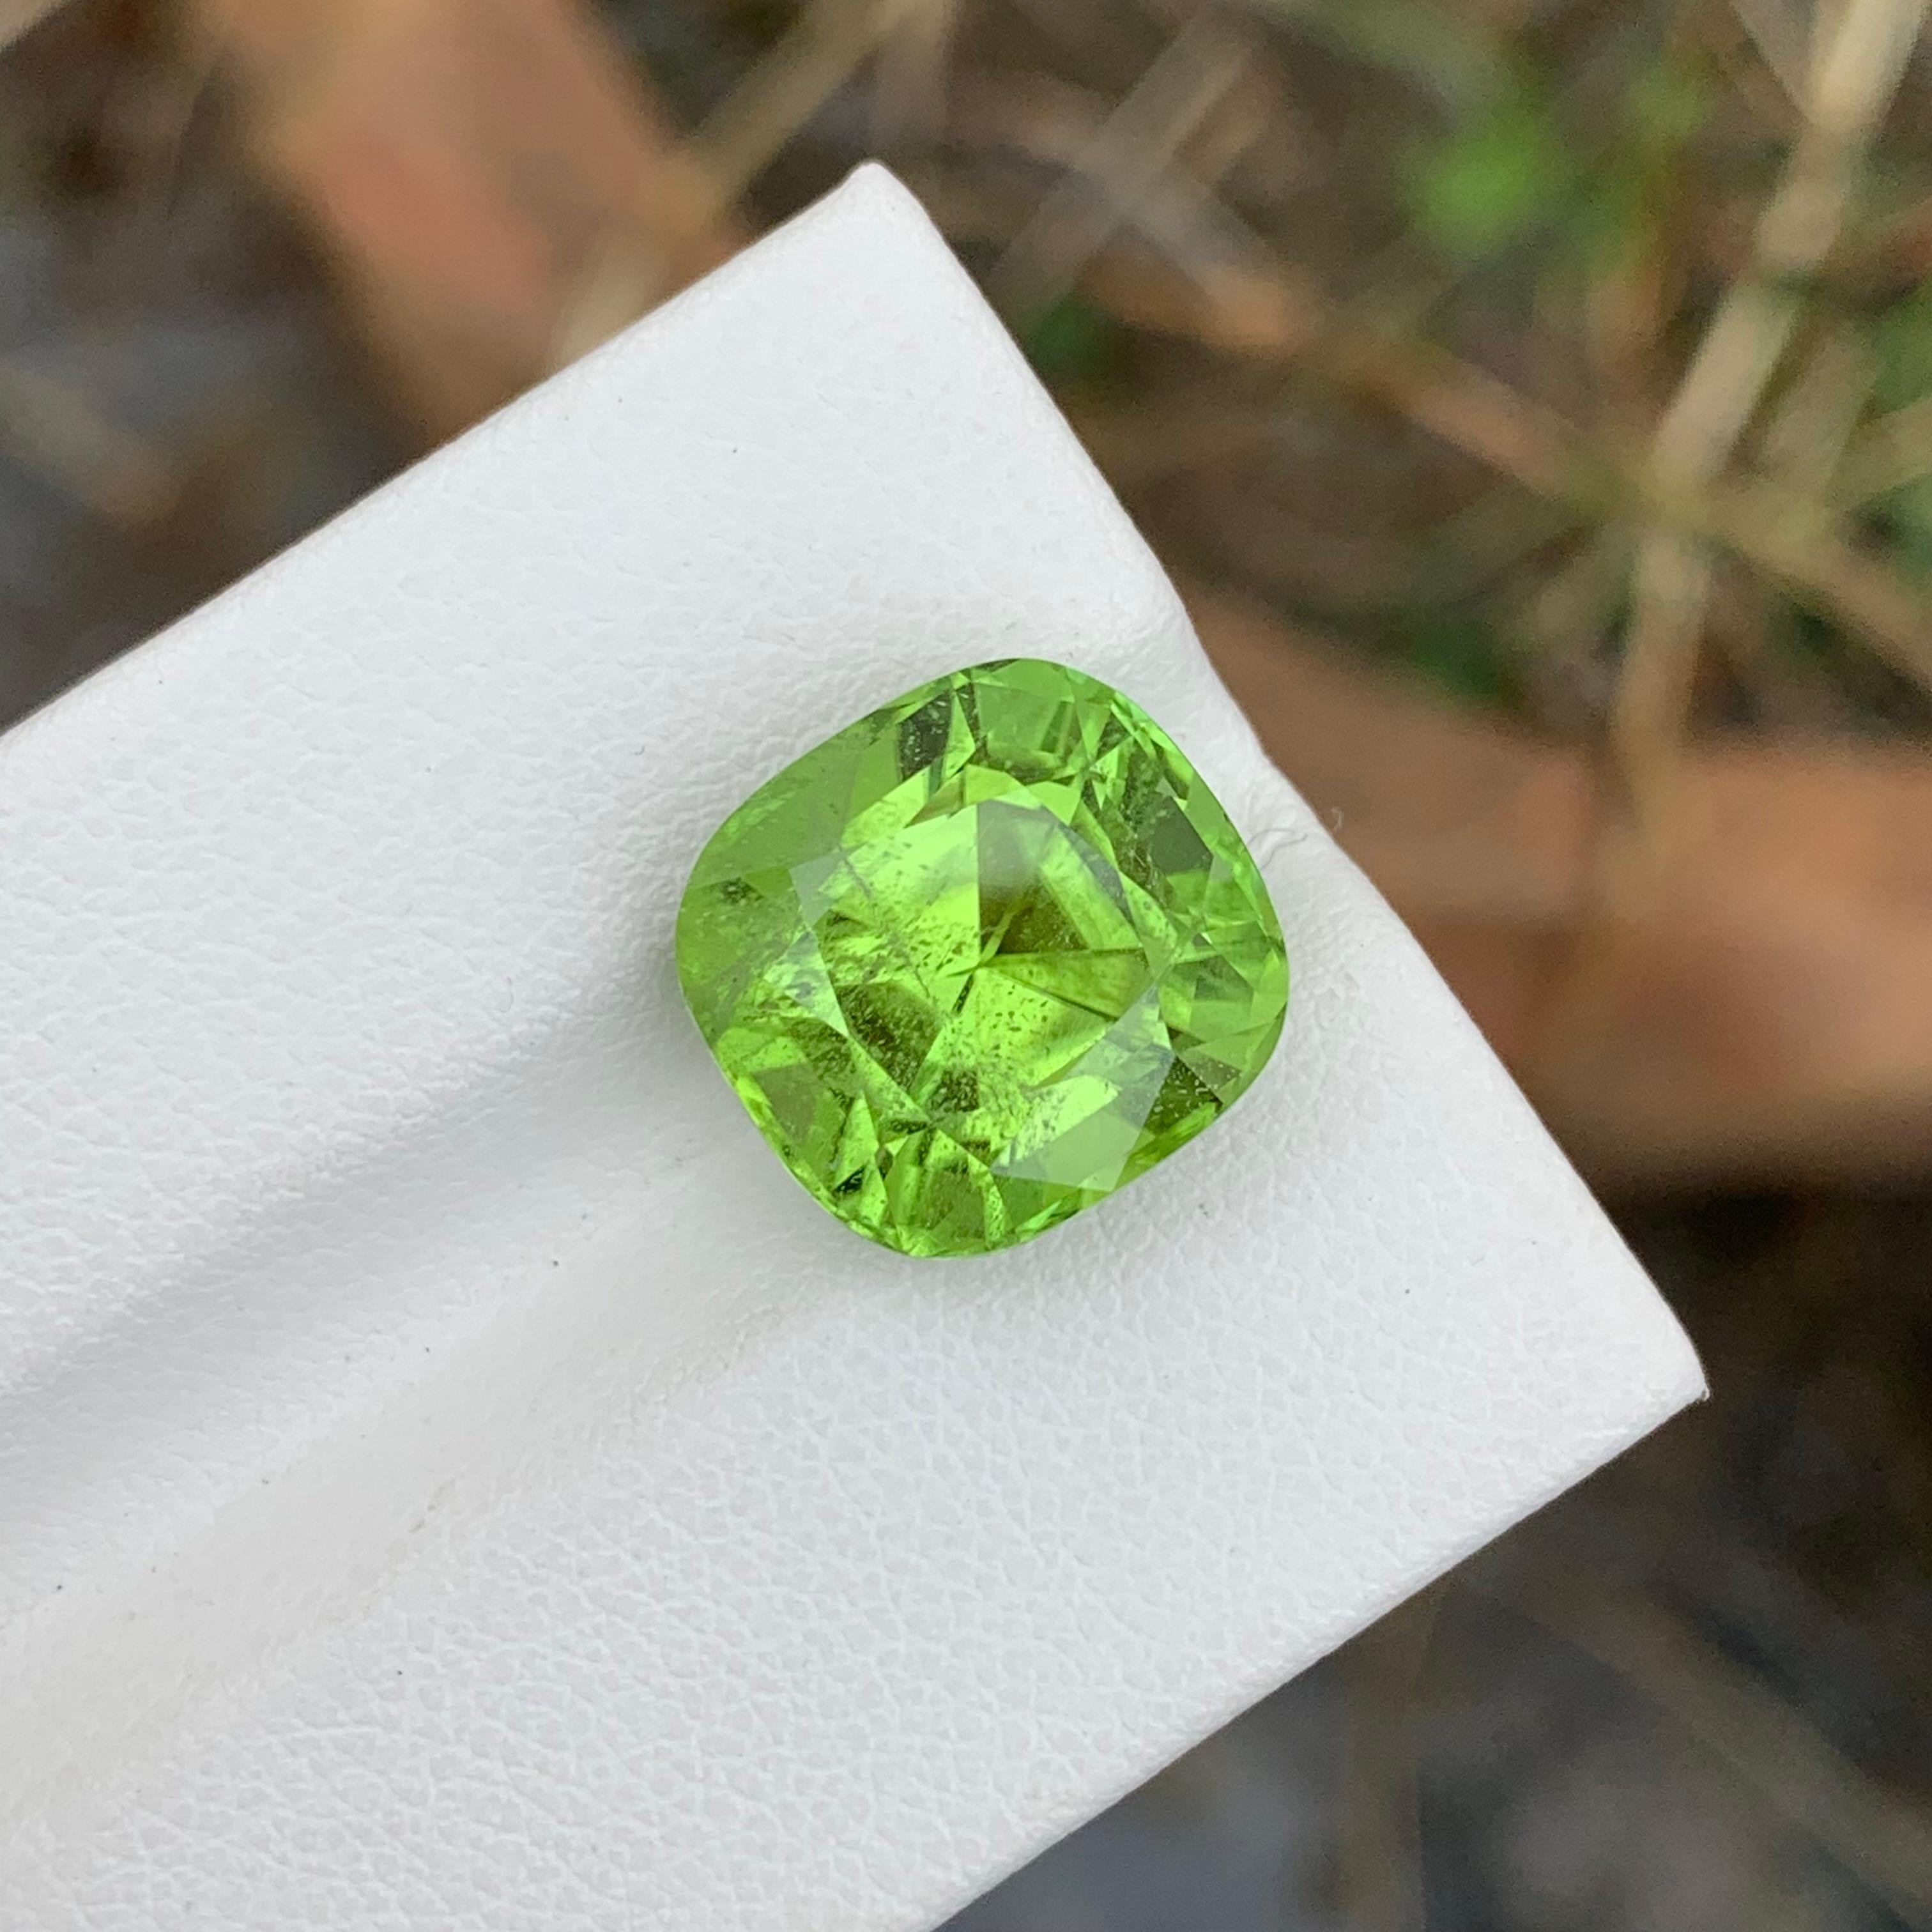 Loose Peridot
Weight: 9.80 Carats
Dimension: 12.4 x 11.8 x 9.2 Mm
Colour: Green
Origin: Supat Valley, Pakistan
Shape: Cushion
Certificate: On Demand
Treatment: Non

Peridot, a vibrant and lustrous gemstone, has been cherished for centuries for its